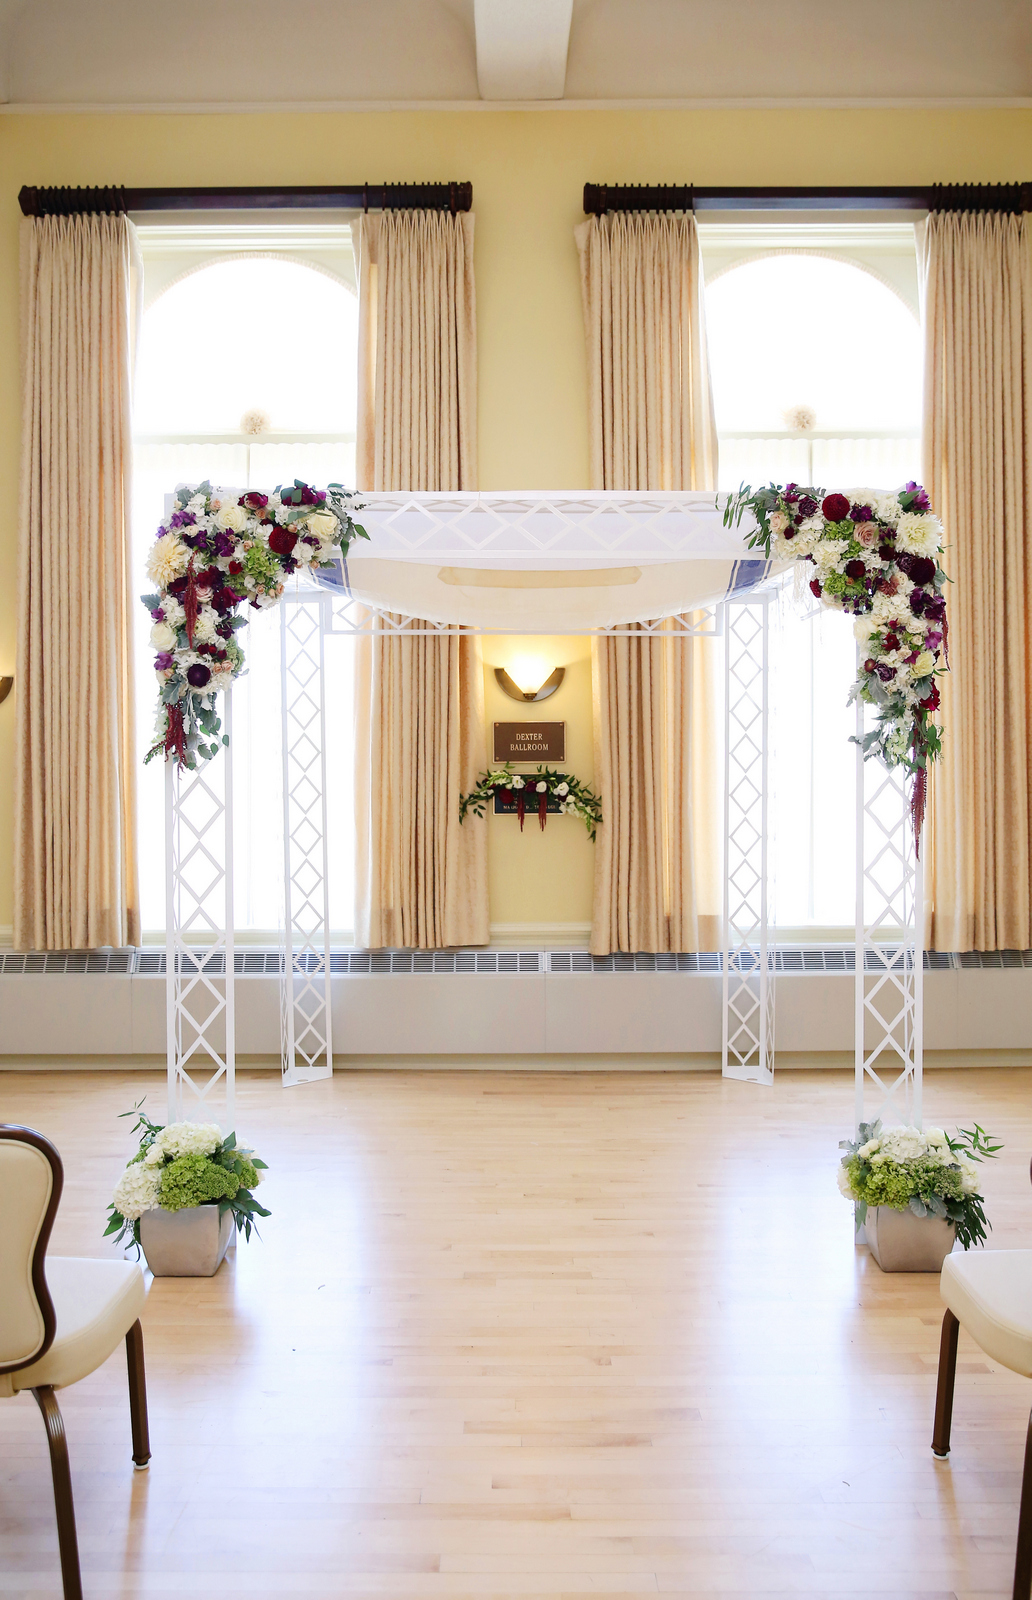 JS Weddings and Events, Grand Rapids Wedding planner and Floral Designer. An elegant and romantic summer wedding in Downtown Grand Rapids at the McKay Ballroom with Burgundy, Blush and Grey.